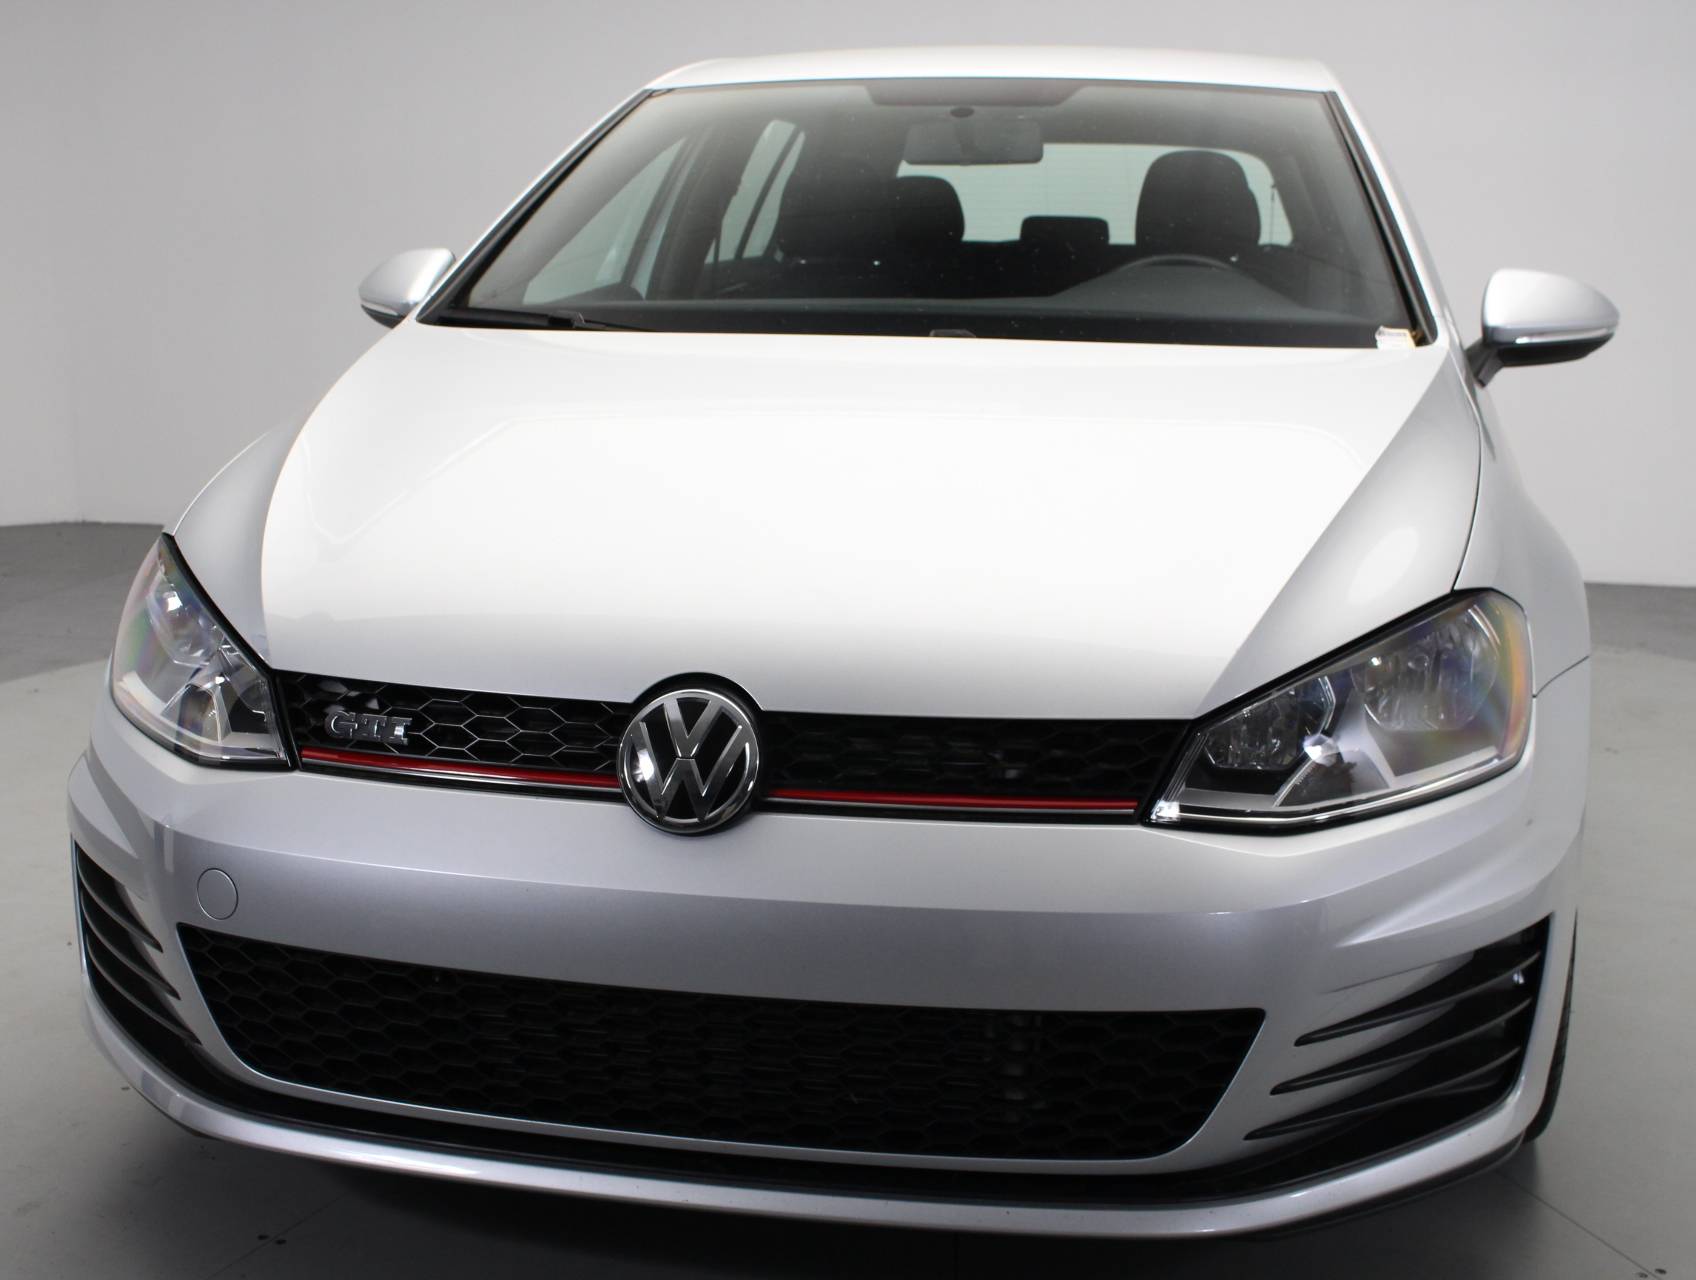 Florida Fine Cars - Used VOLKSWAGEN GTI 2017 WEST PALM S